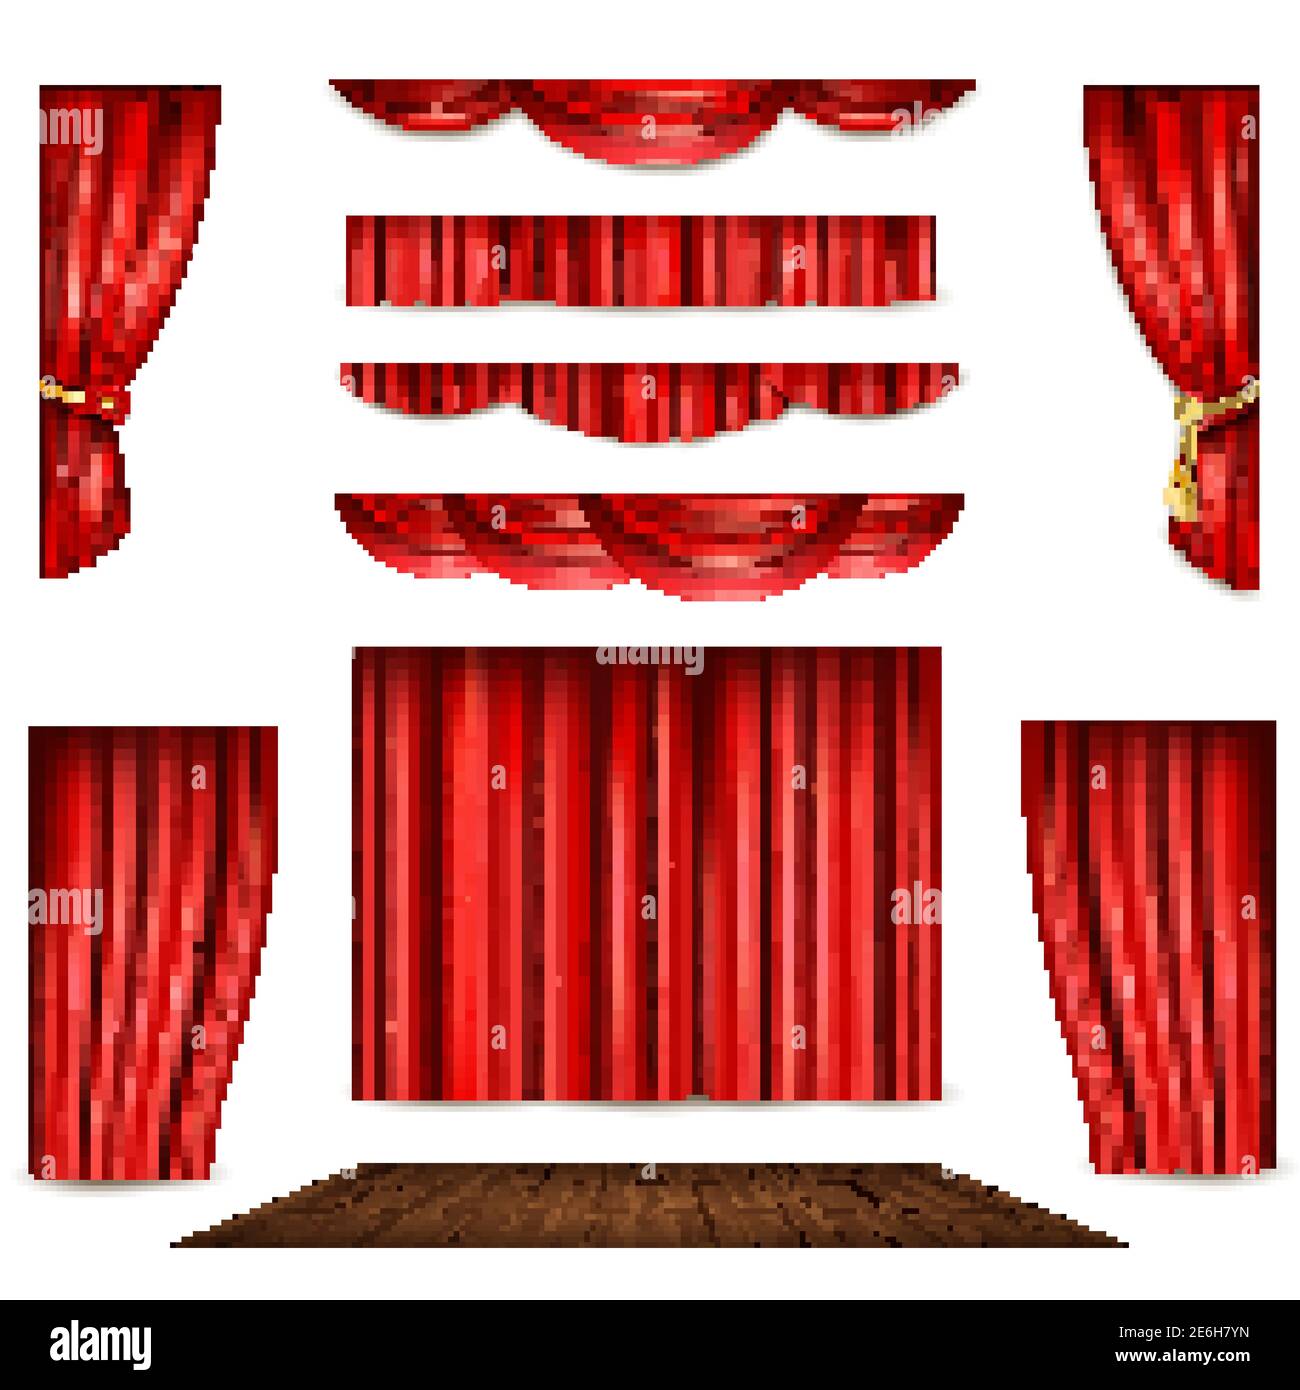 Red theatre curtain in different shape and wooden stage realistic isolated vector illustration Stock Vector